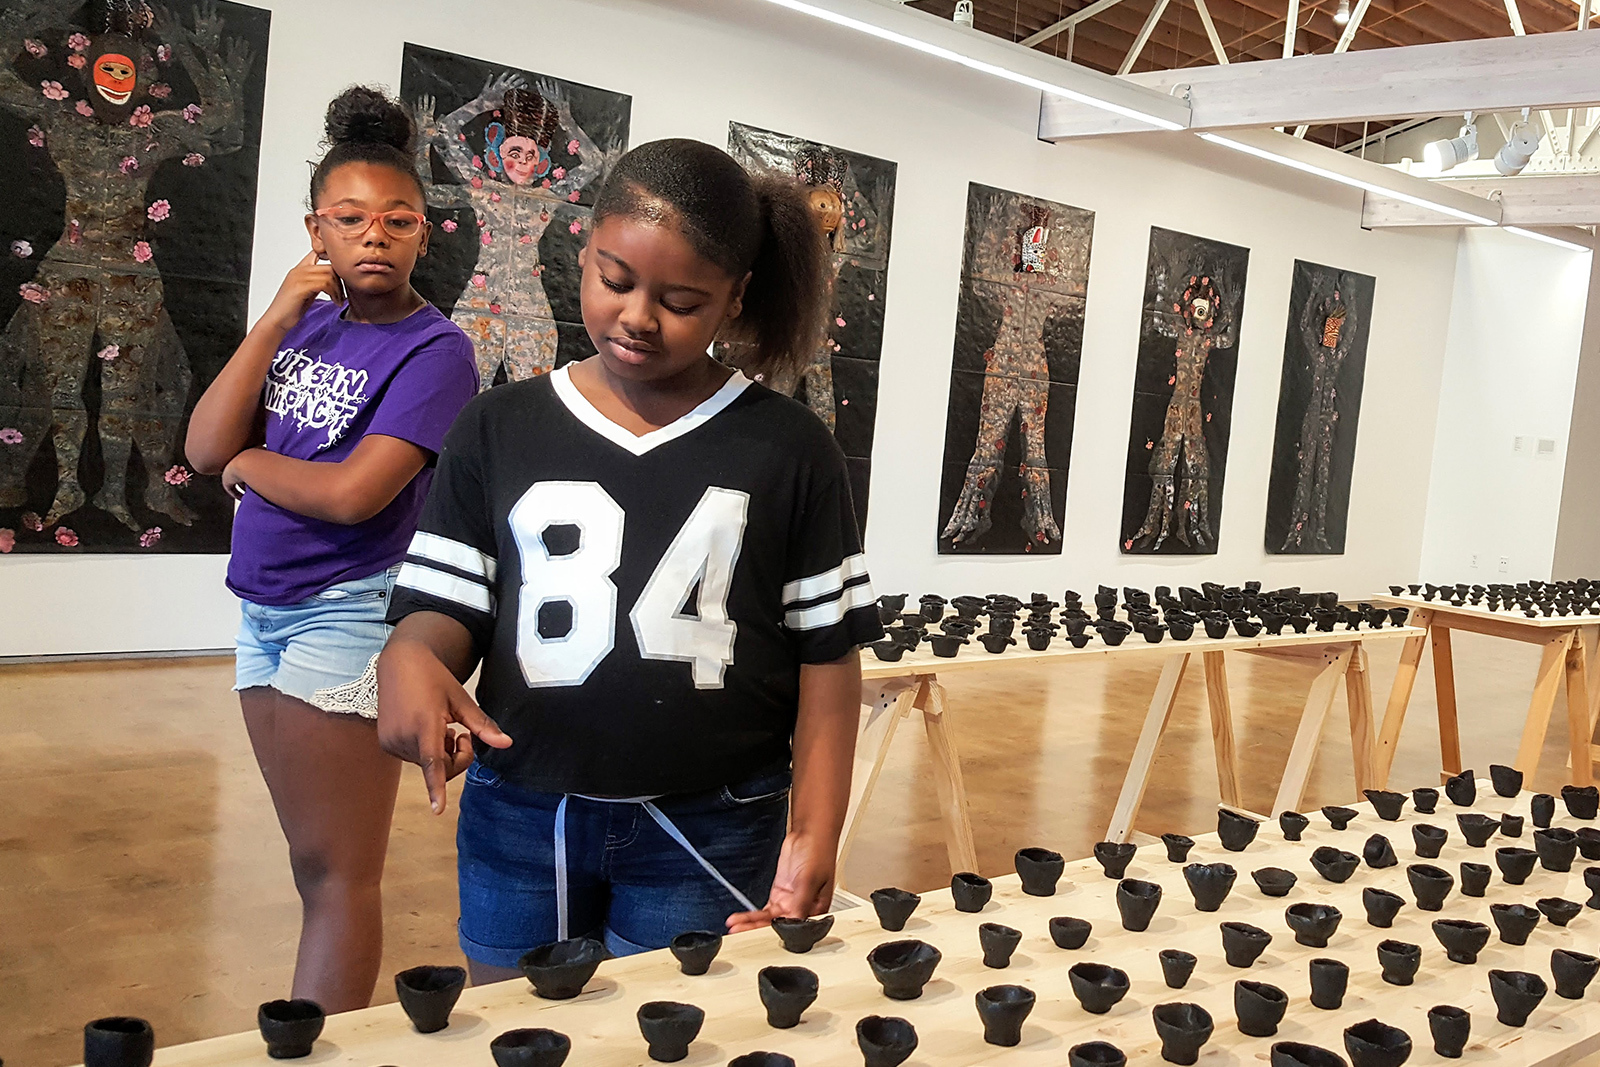 Two young girls examine small sculptures in the gallery